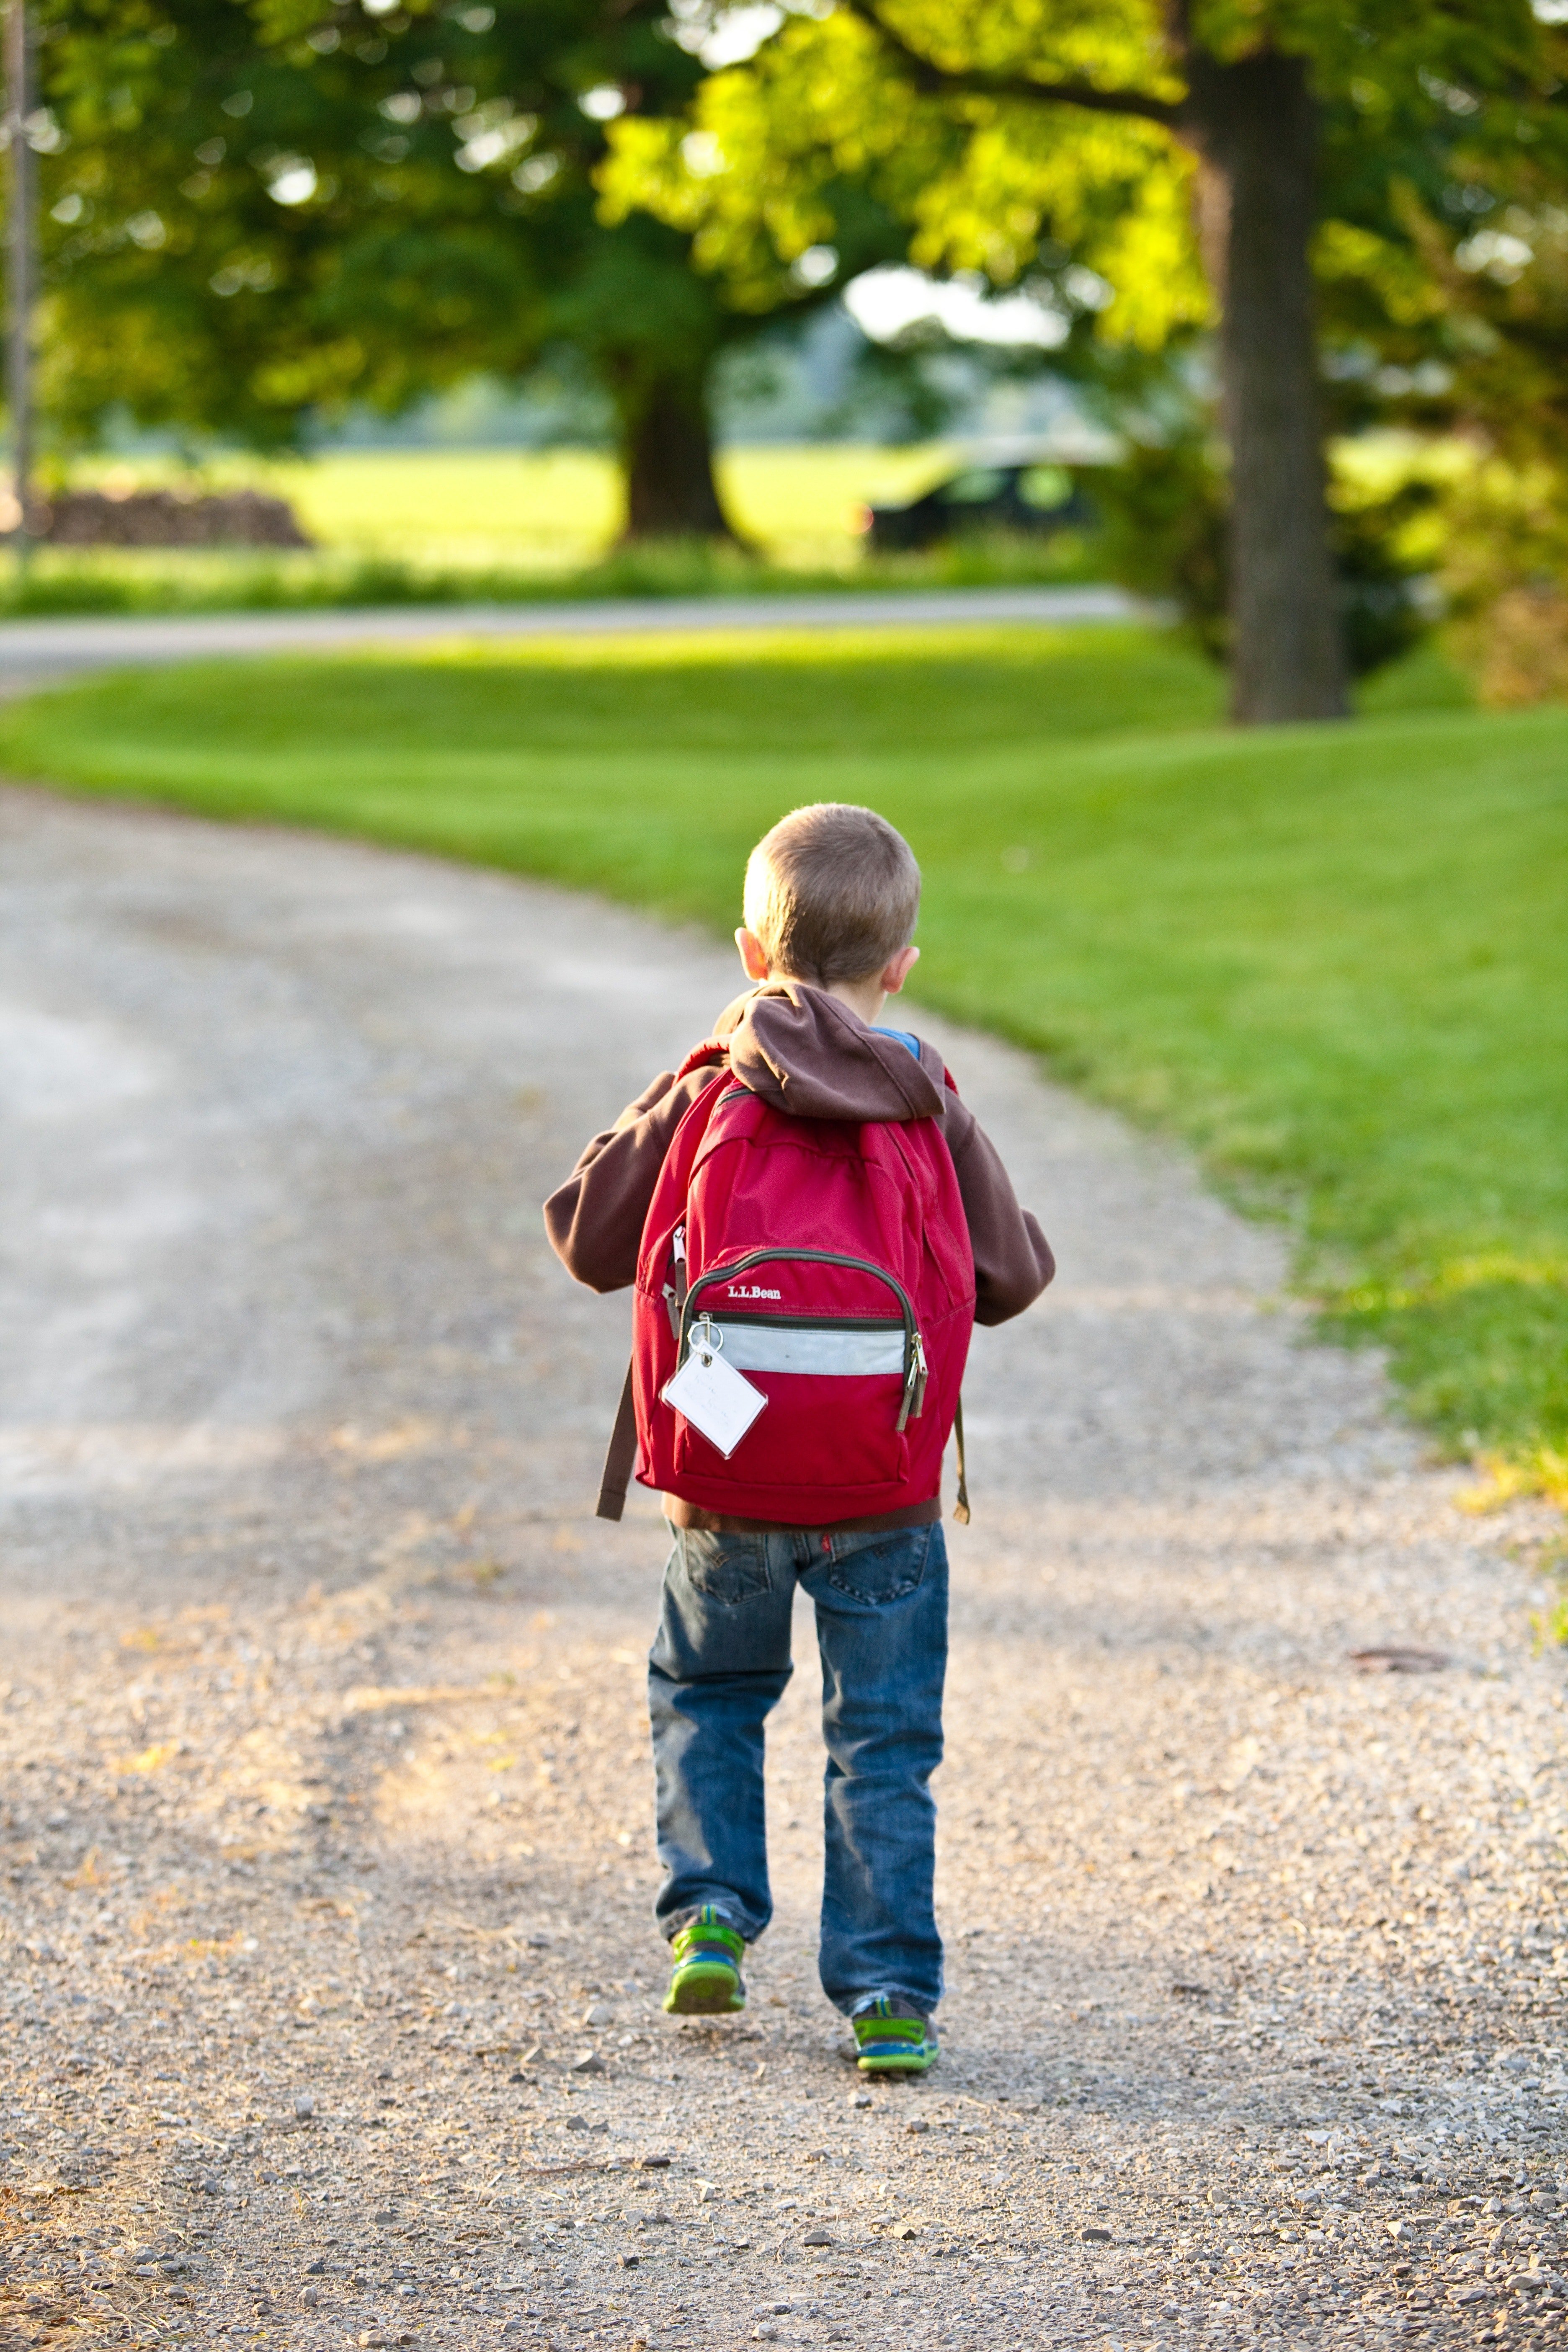 A young boy walking to school carrying his backpack. | Source: Pexels